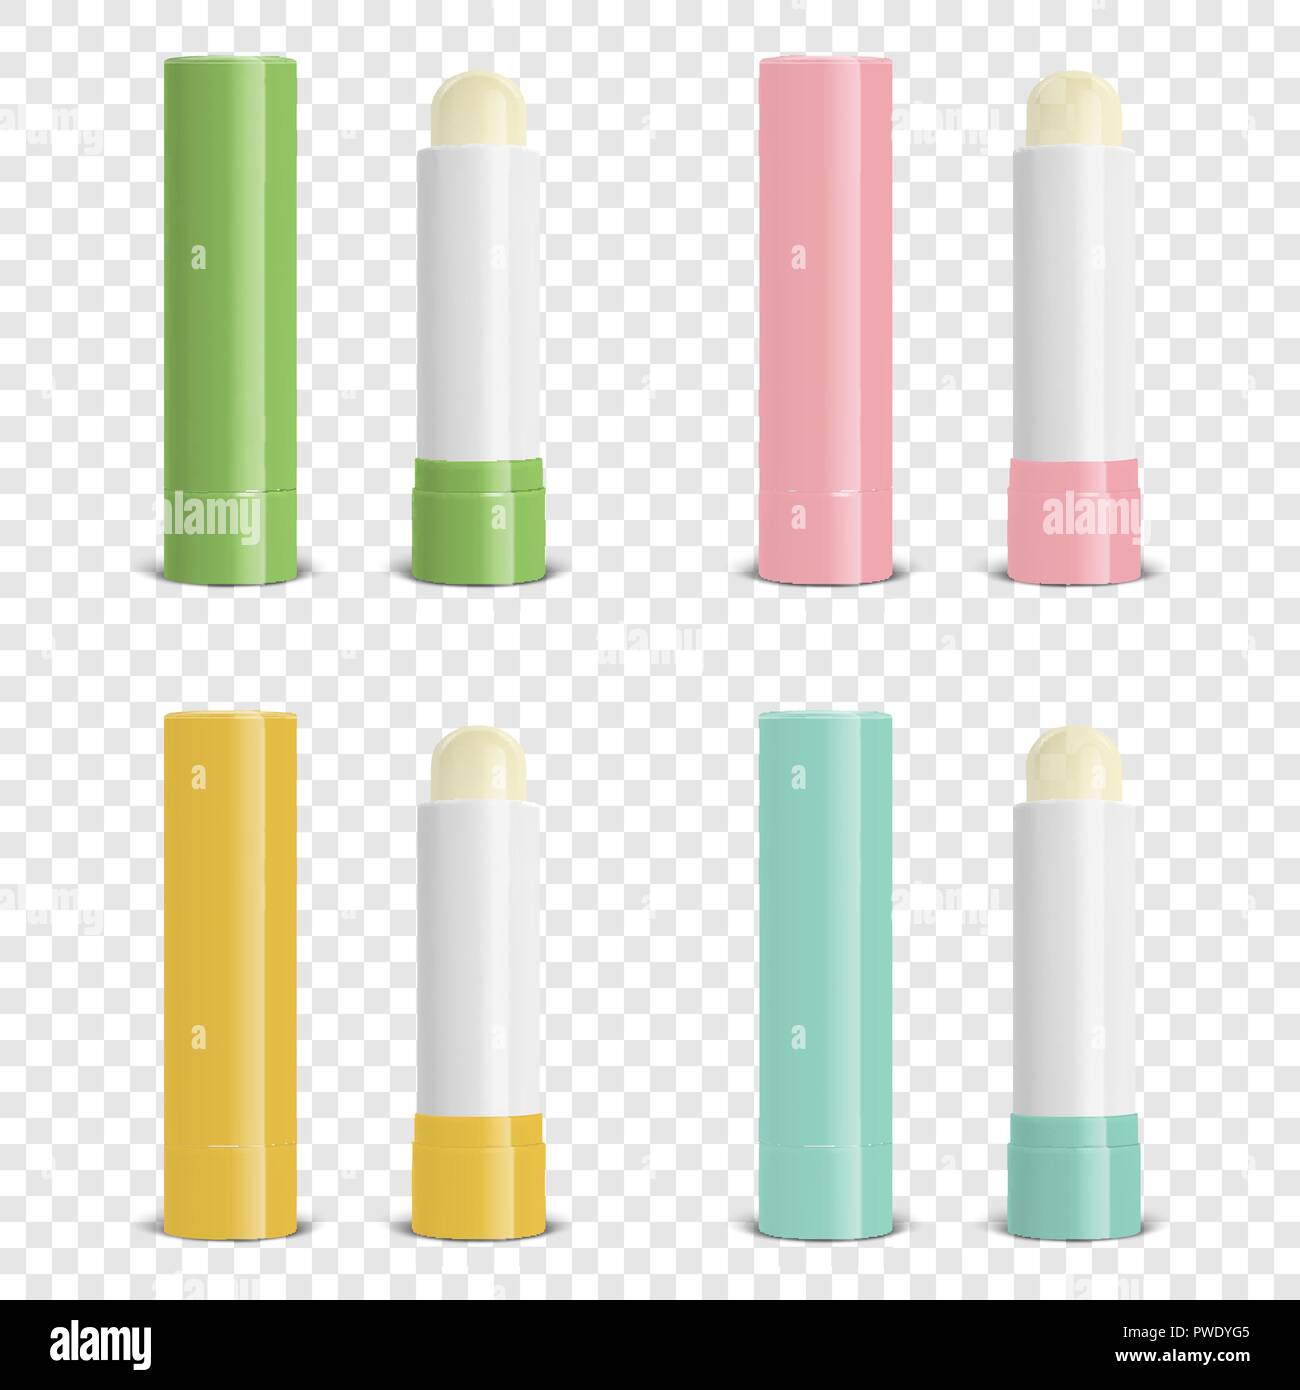 Download Vector Realistic 3d Blank Closed And Opened Lip Balm Stick Set Green Pink Orange Blue Closeup Isolated On Transparent Background Design Template For Cosmetic Packaging Lipstick Mockup Stock Vector Image